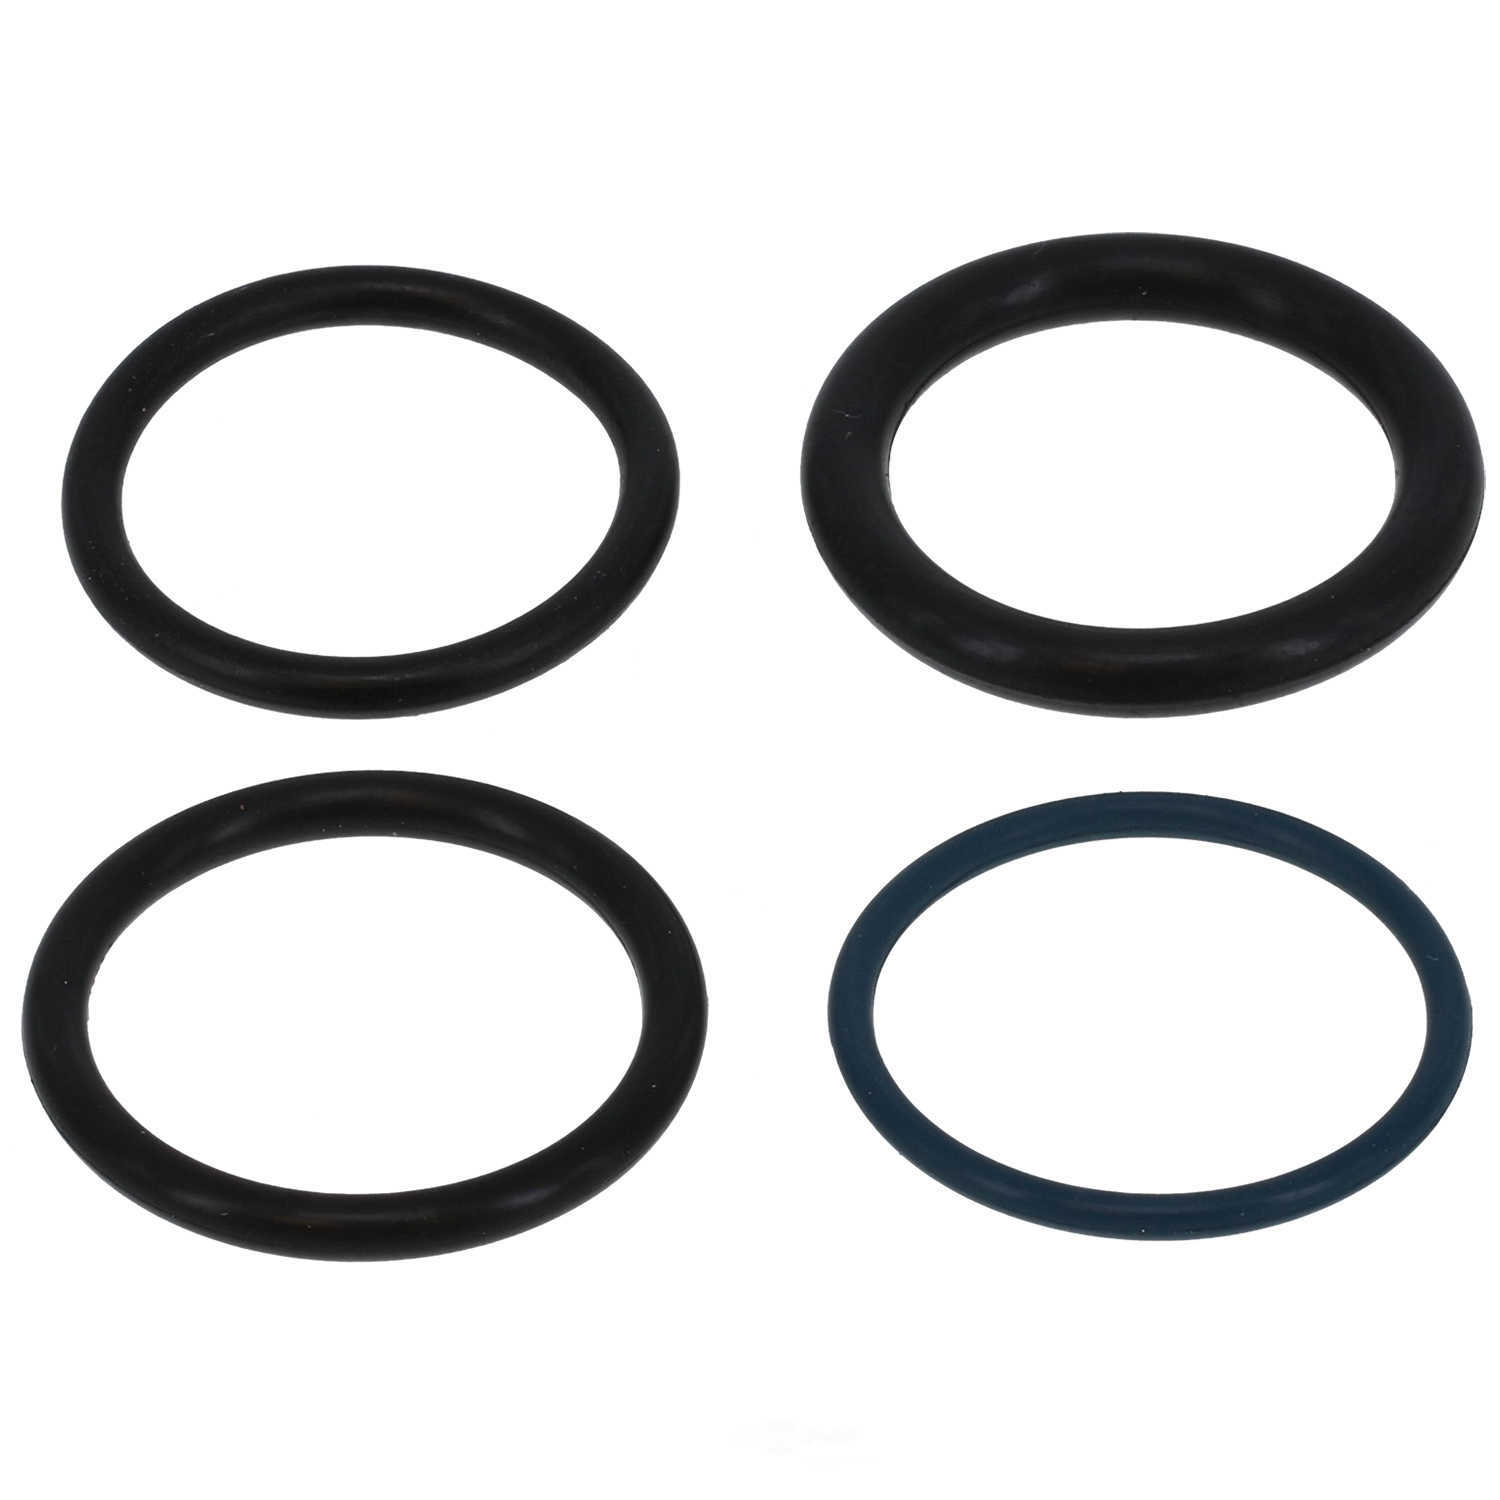 GB REMANUFACTURING INC. - Fuel Injector Seal Kit - GBR 8-003